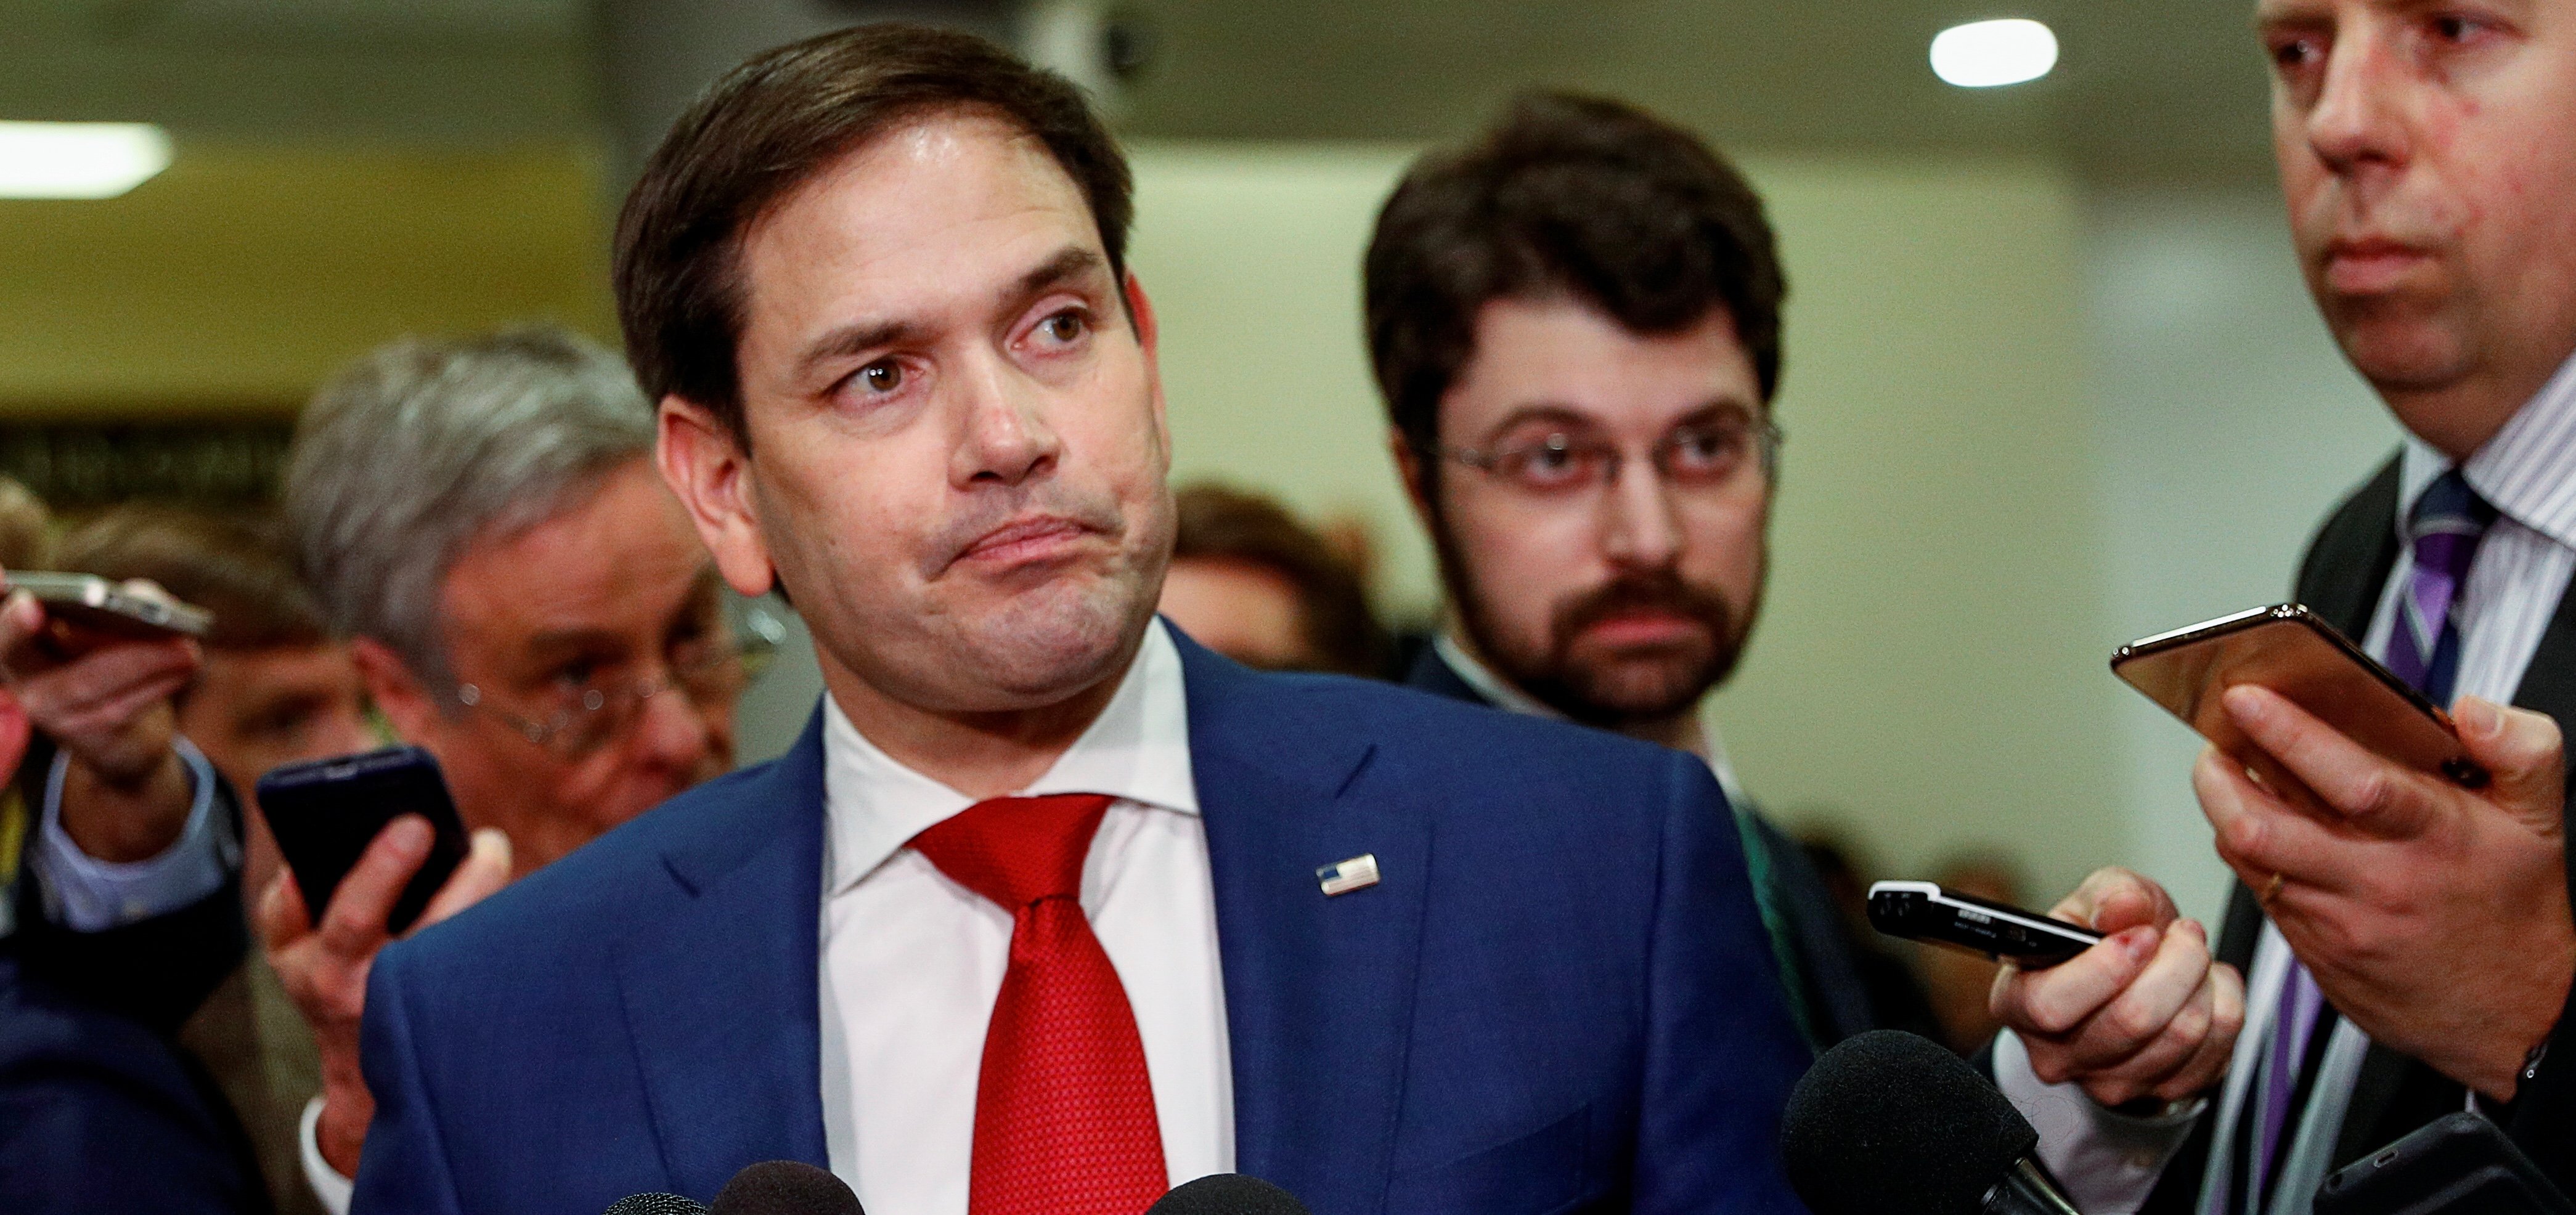 U.S. Senator Marco Rubio (R-FL) talks to reporters following a classified national security briefing of the U.S. Senate on developments with Iran after attacks by Iran on U.S. forces in Iraq, at the U.S. Capitol in Washington, U.S., Jan. 8, 2020. REUTERS/Tom Brenner